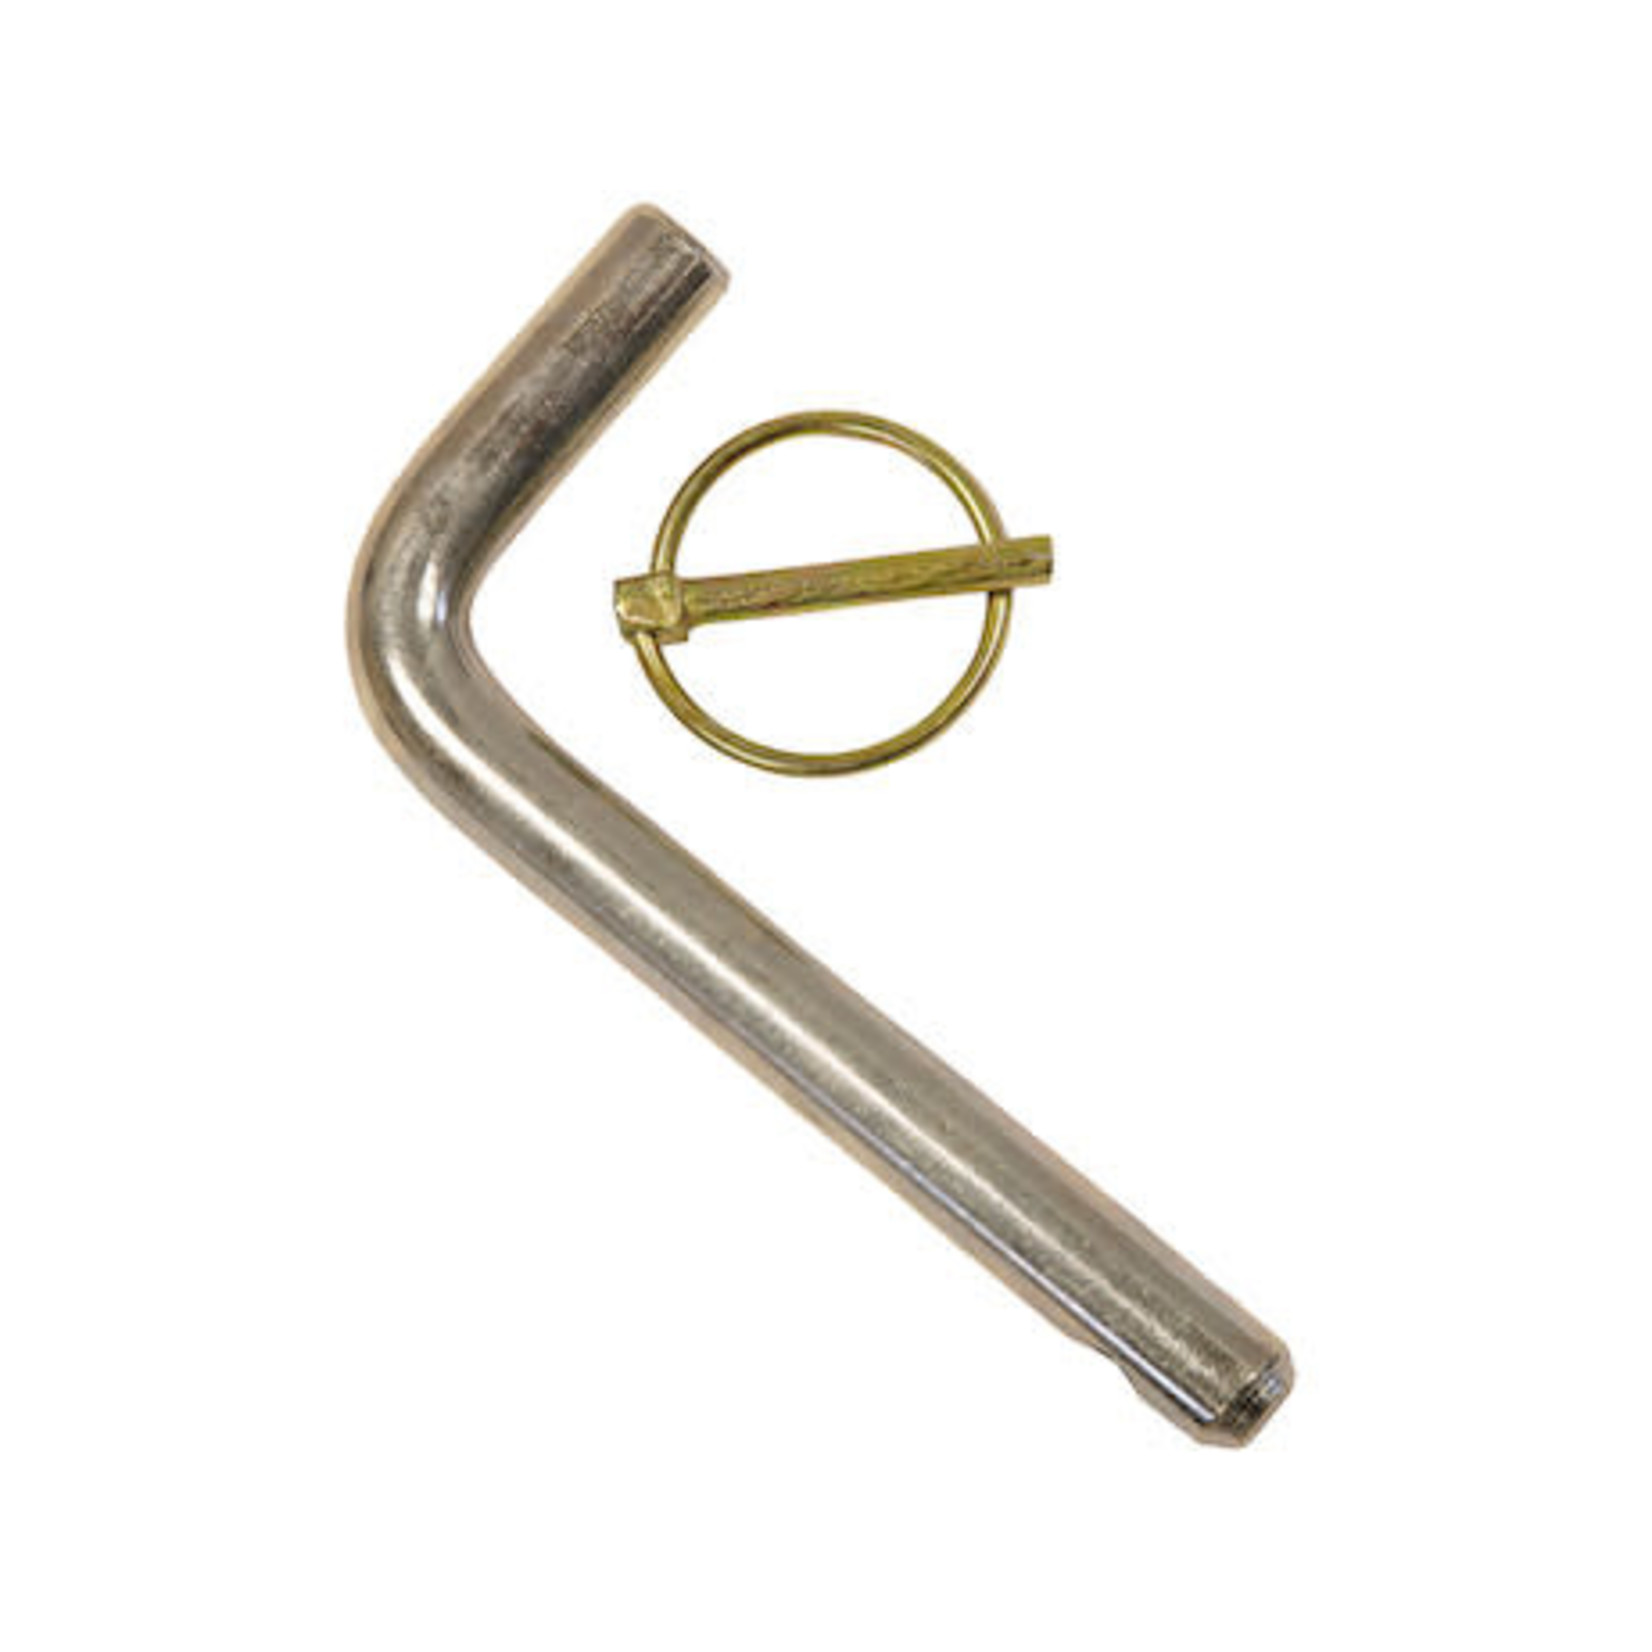 SAM SAM Two 5/8 Inch Hinge Pins With Linch Pin-Replaces Meyer #08562